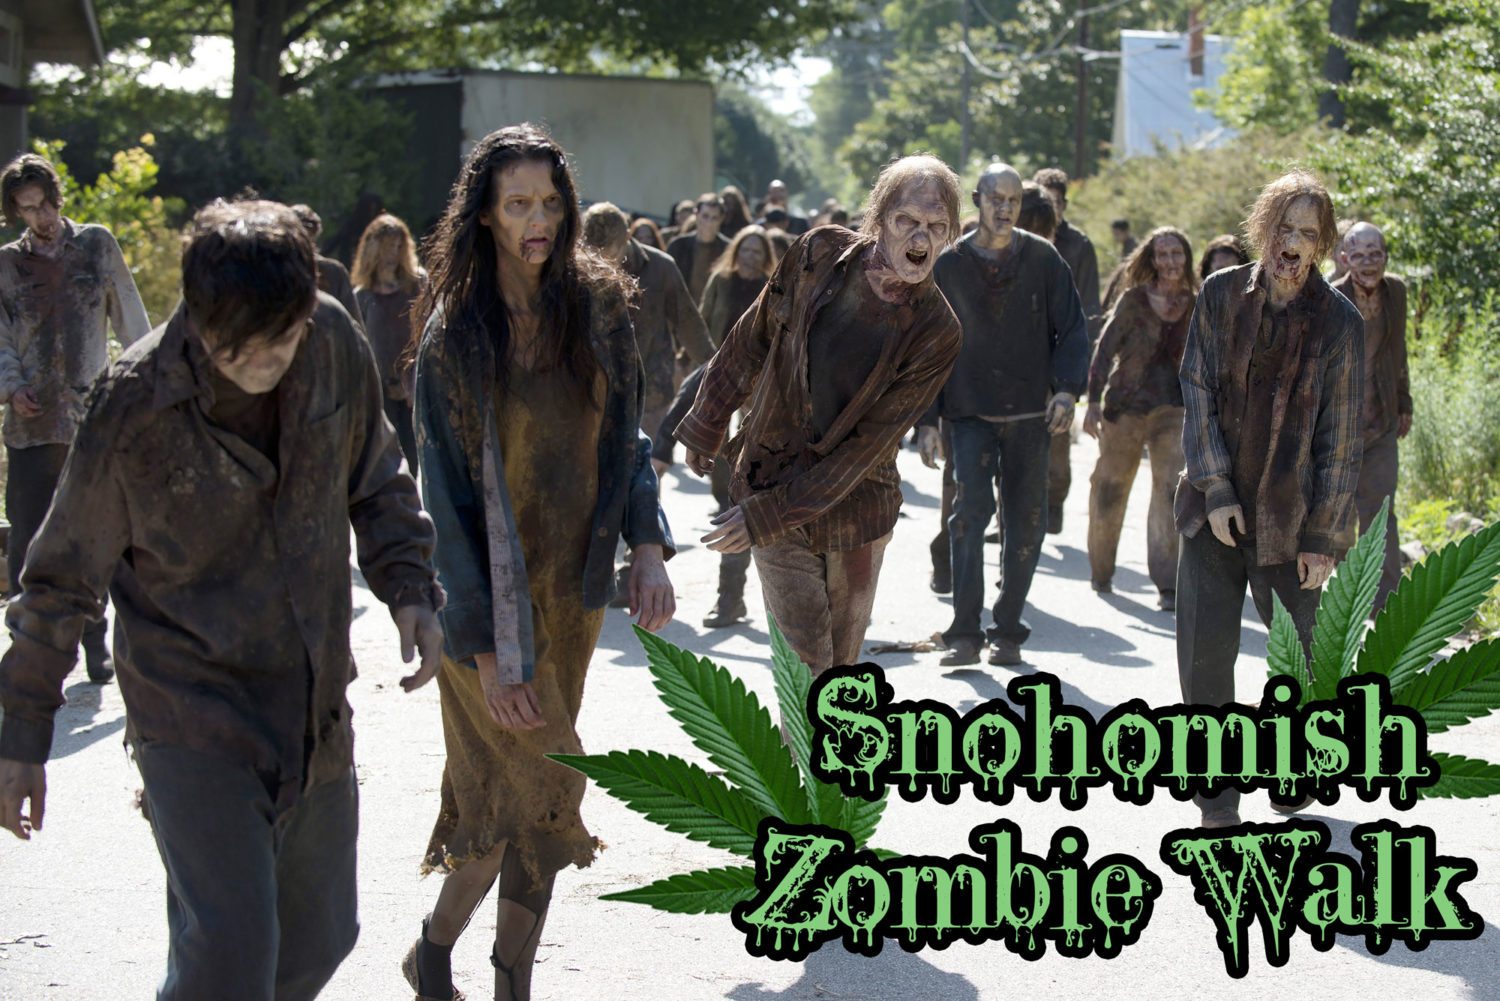 Get Zombified for the Snohomish Zombie Walk